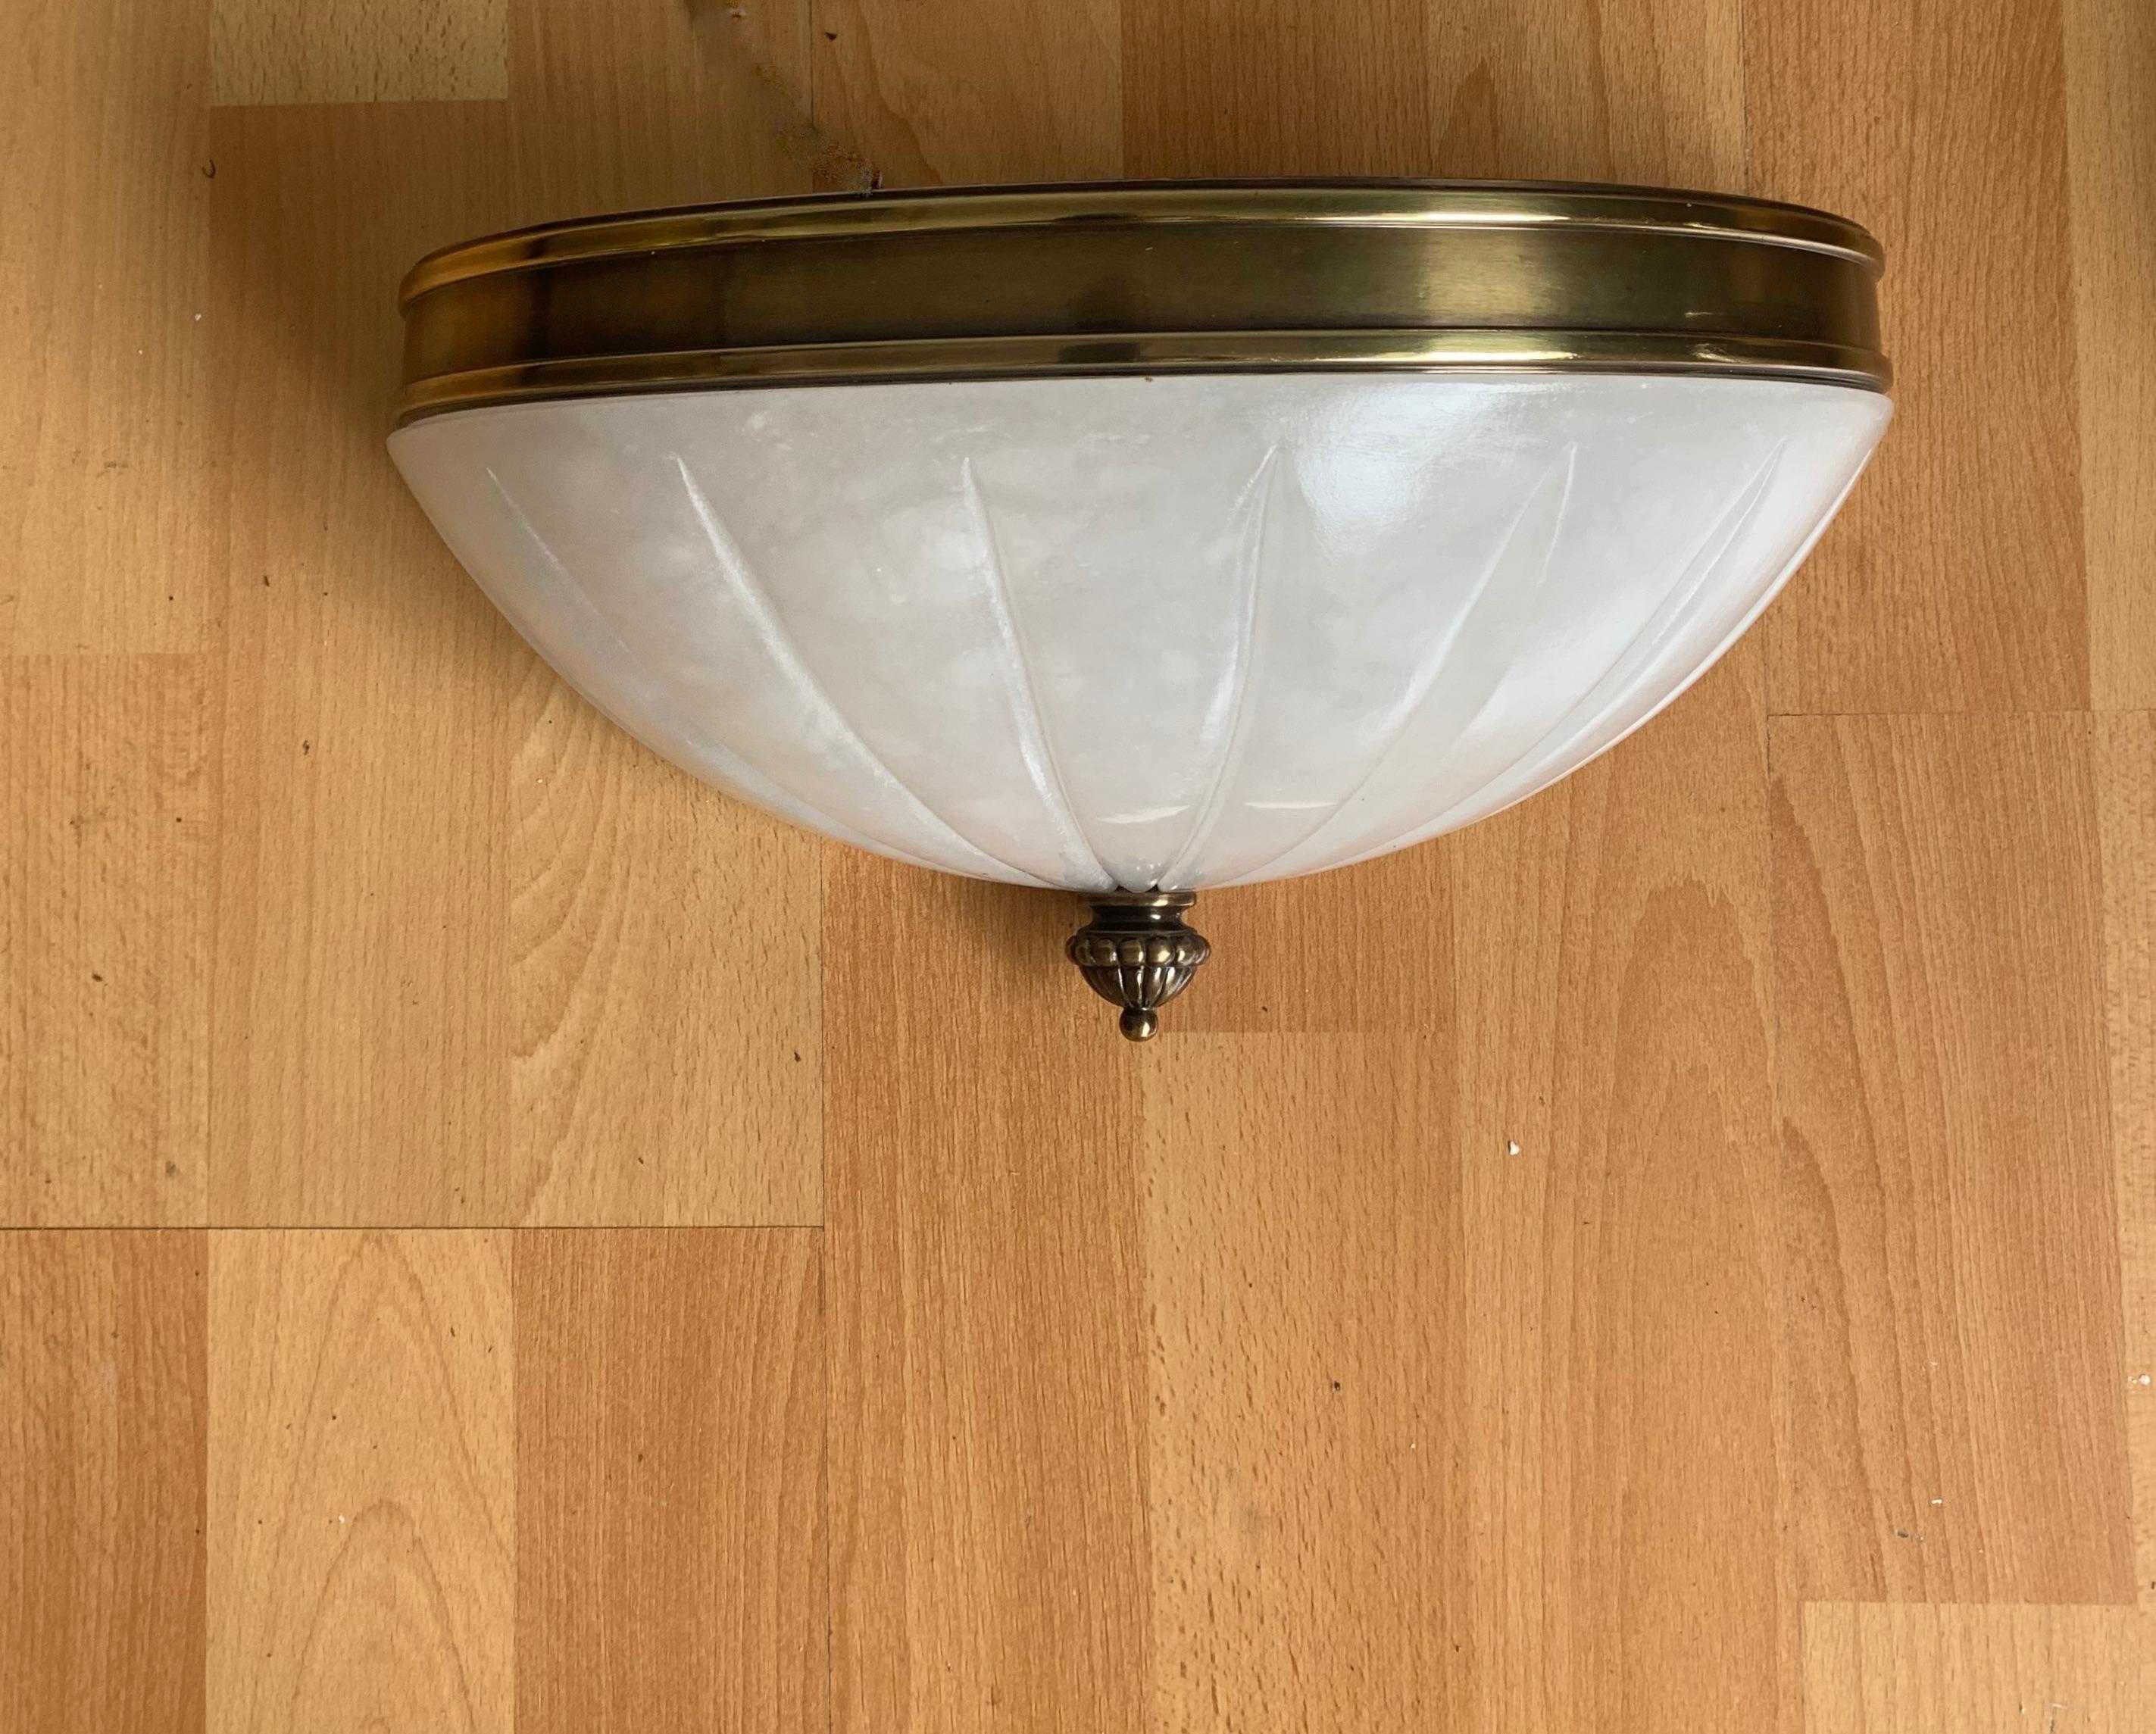 Rare Pair of Midcentury Modern, Alabaster & Brass Wall Sconces / Fixtures For Sale 9